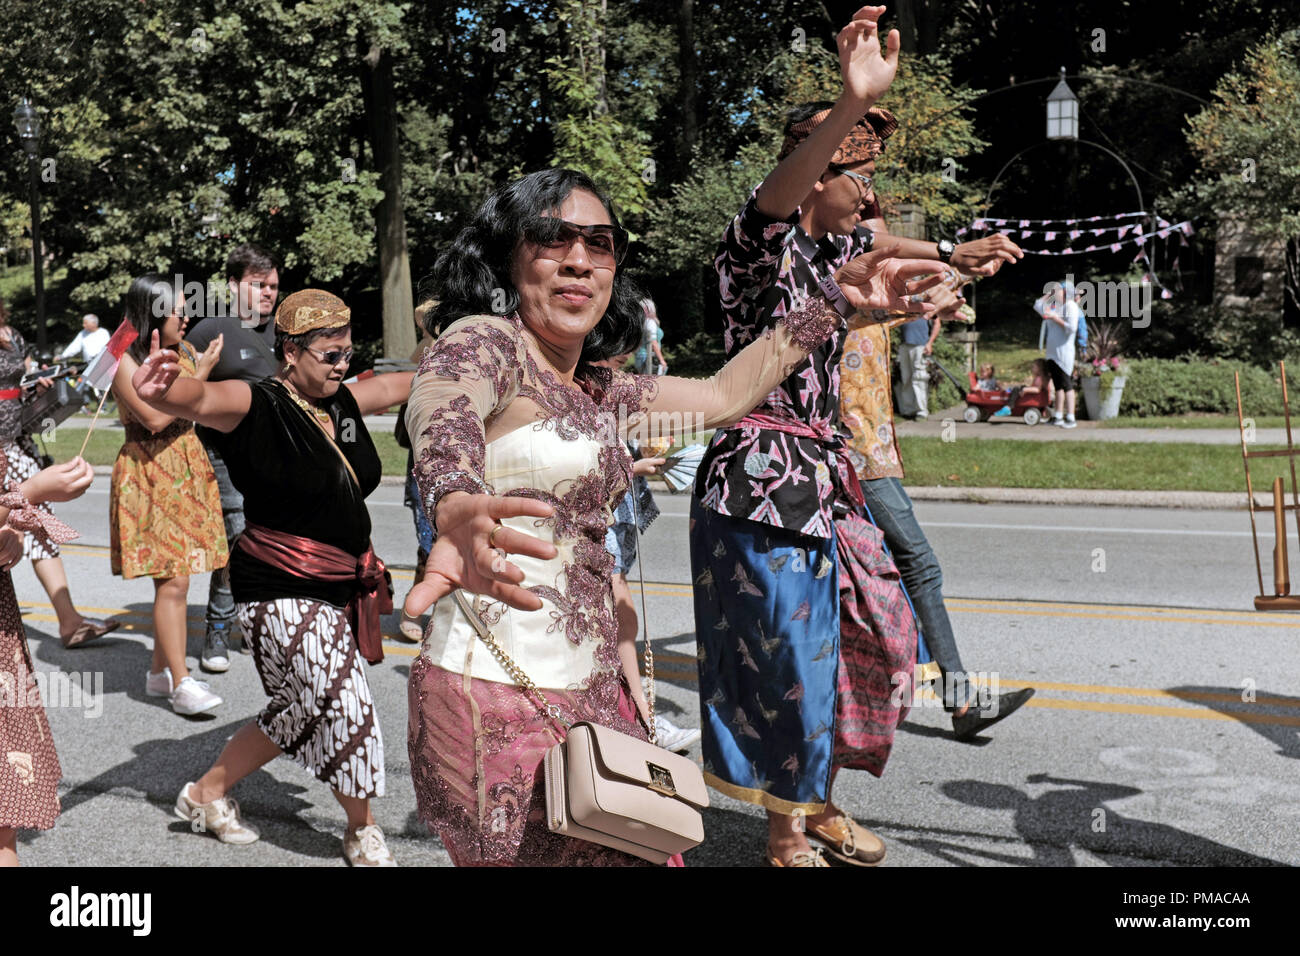 Indonesian-American community perform a traditional dance as they participate in the 73rd Annual One World Day Parade of Flags in Cleveland Ohio. Stock Photo